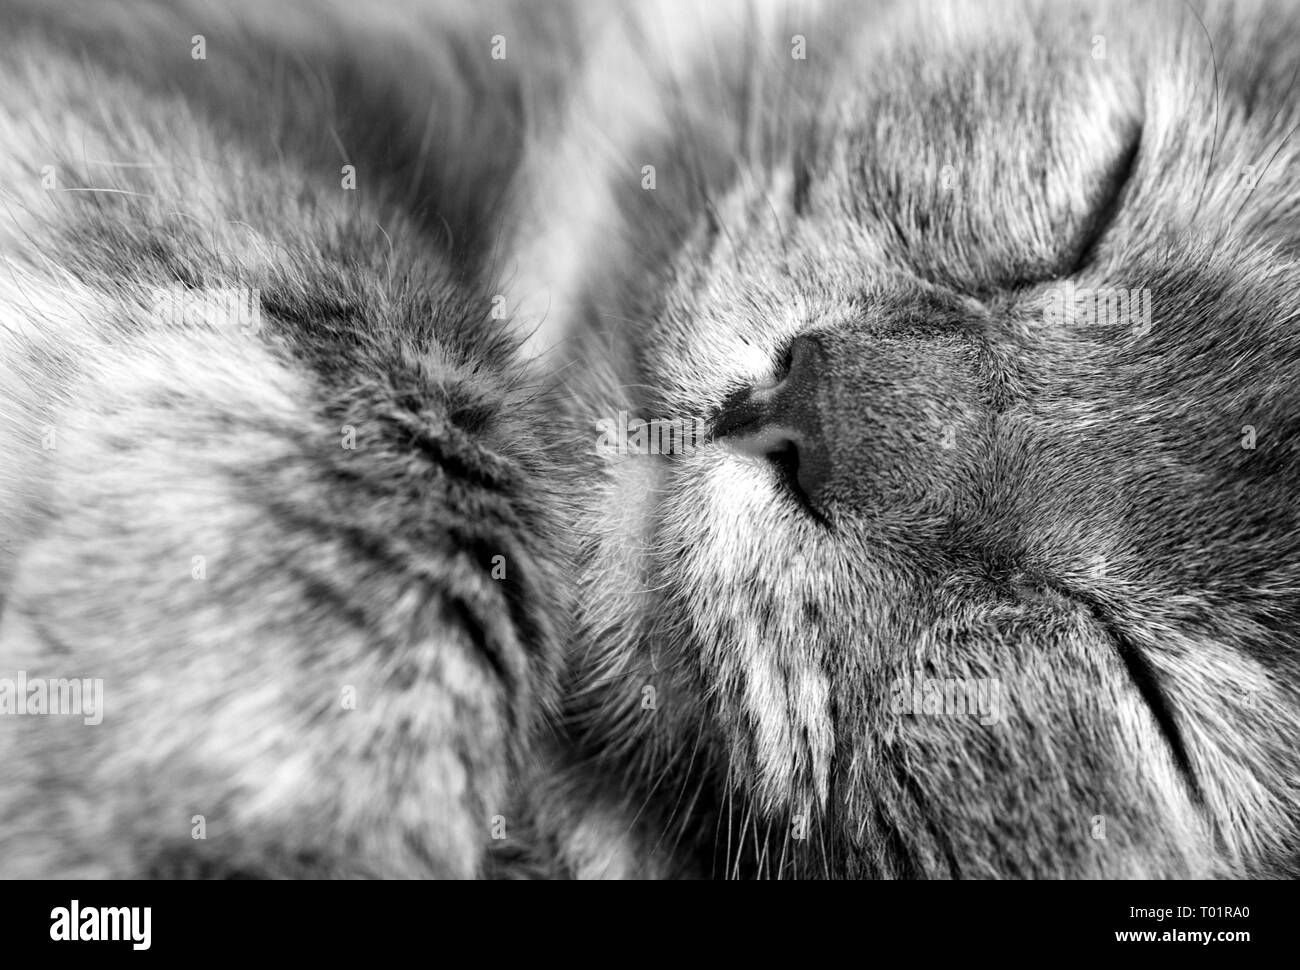 Closeup image of a sleeping grey feline Cat with yellow eyes and fur detail with area for vet and domestic animal based designs and backgrounds Stock Photo